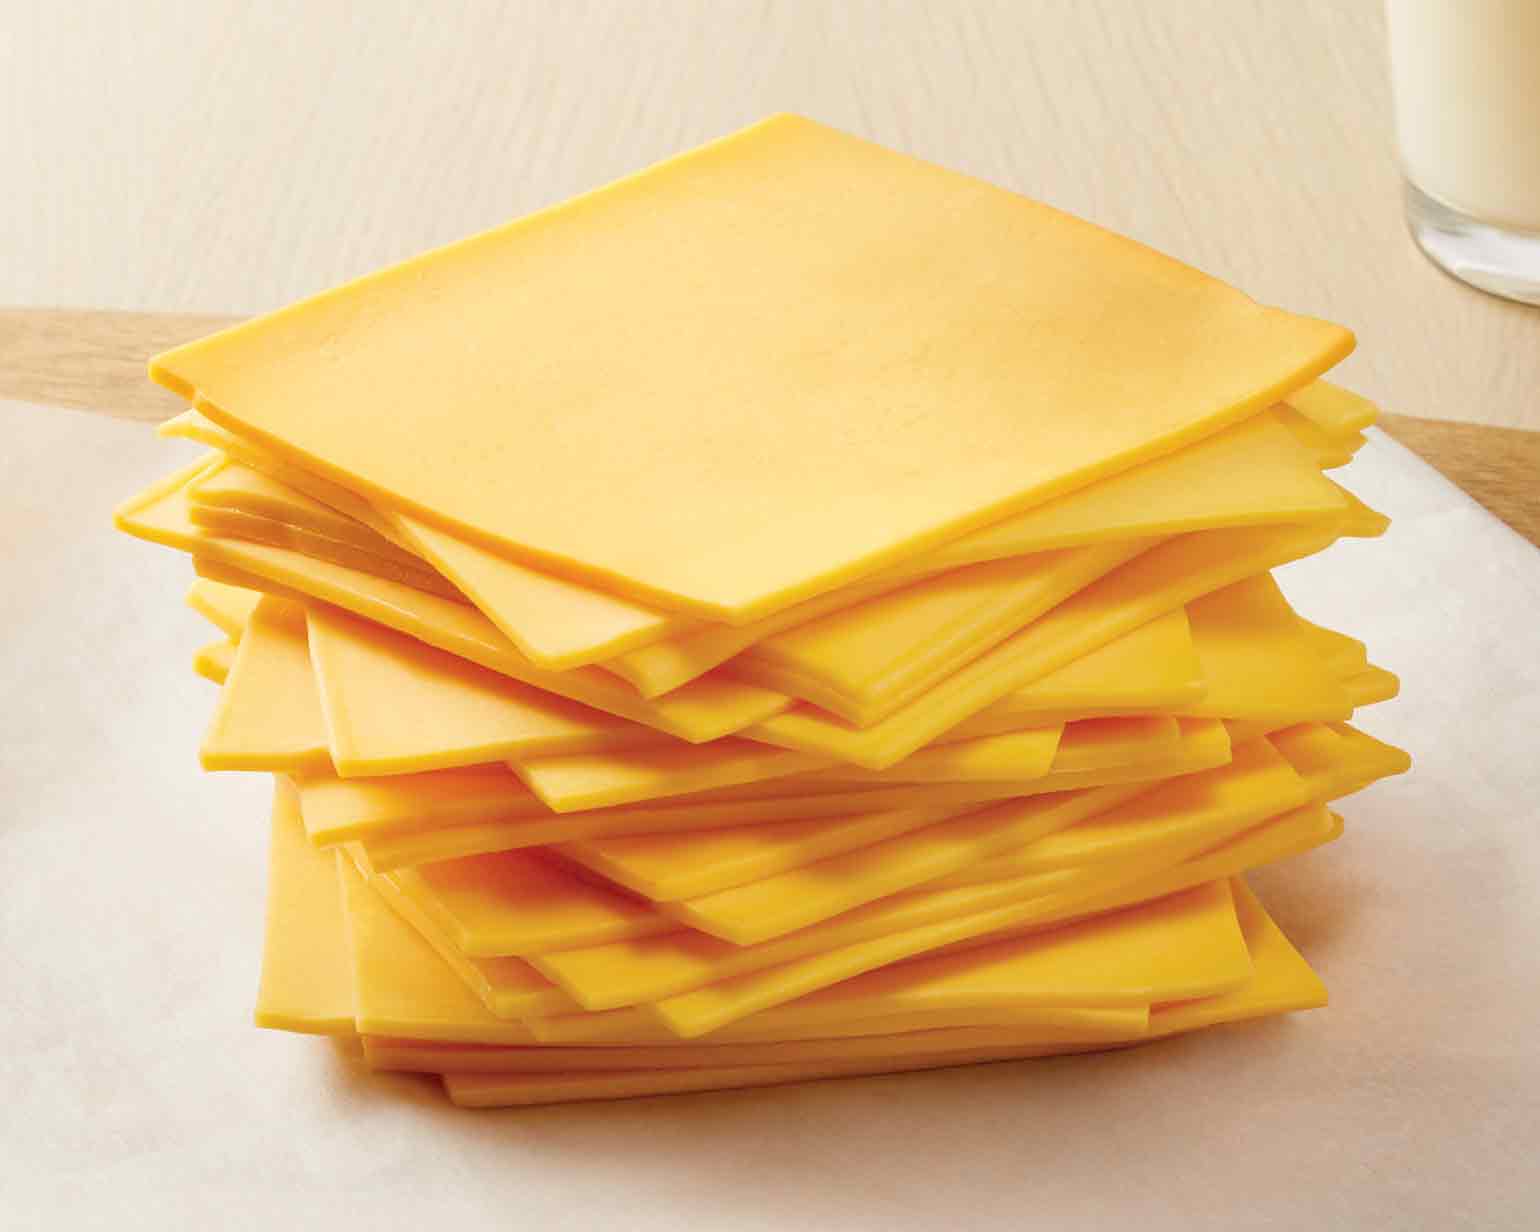 American Cheese american cheese, processed cheese, amish cheese blend, cheese blend, blended cheese, amish american cheese, organic cheese, organic amish cheese, cheese, amish, amish farm, amish organic cheese, simply cheese, local amish cheese, amish cheese near me